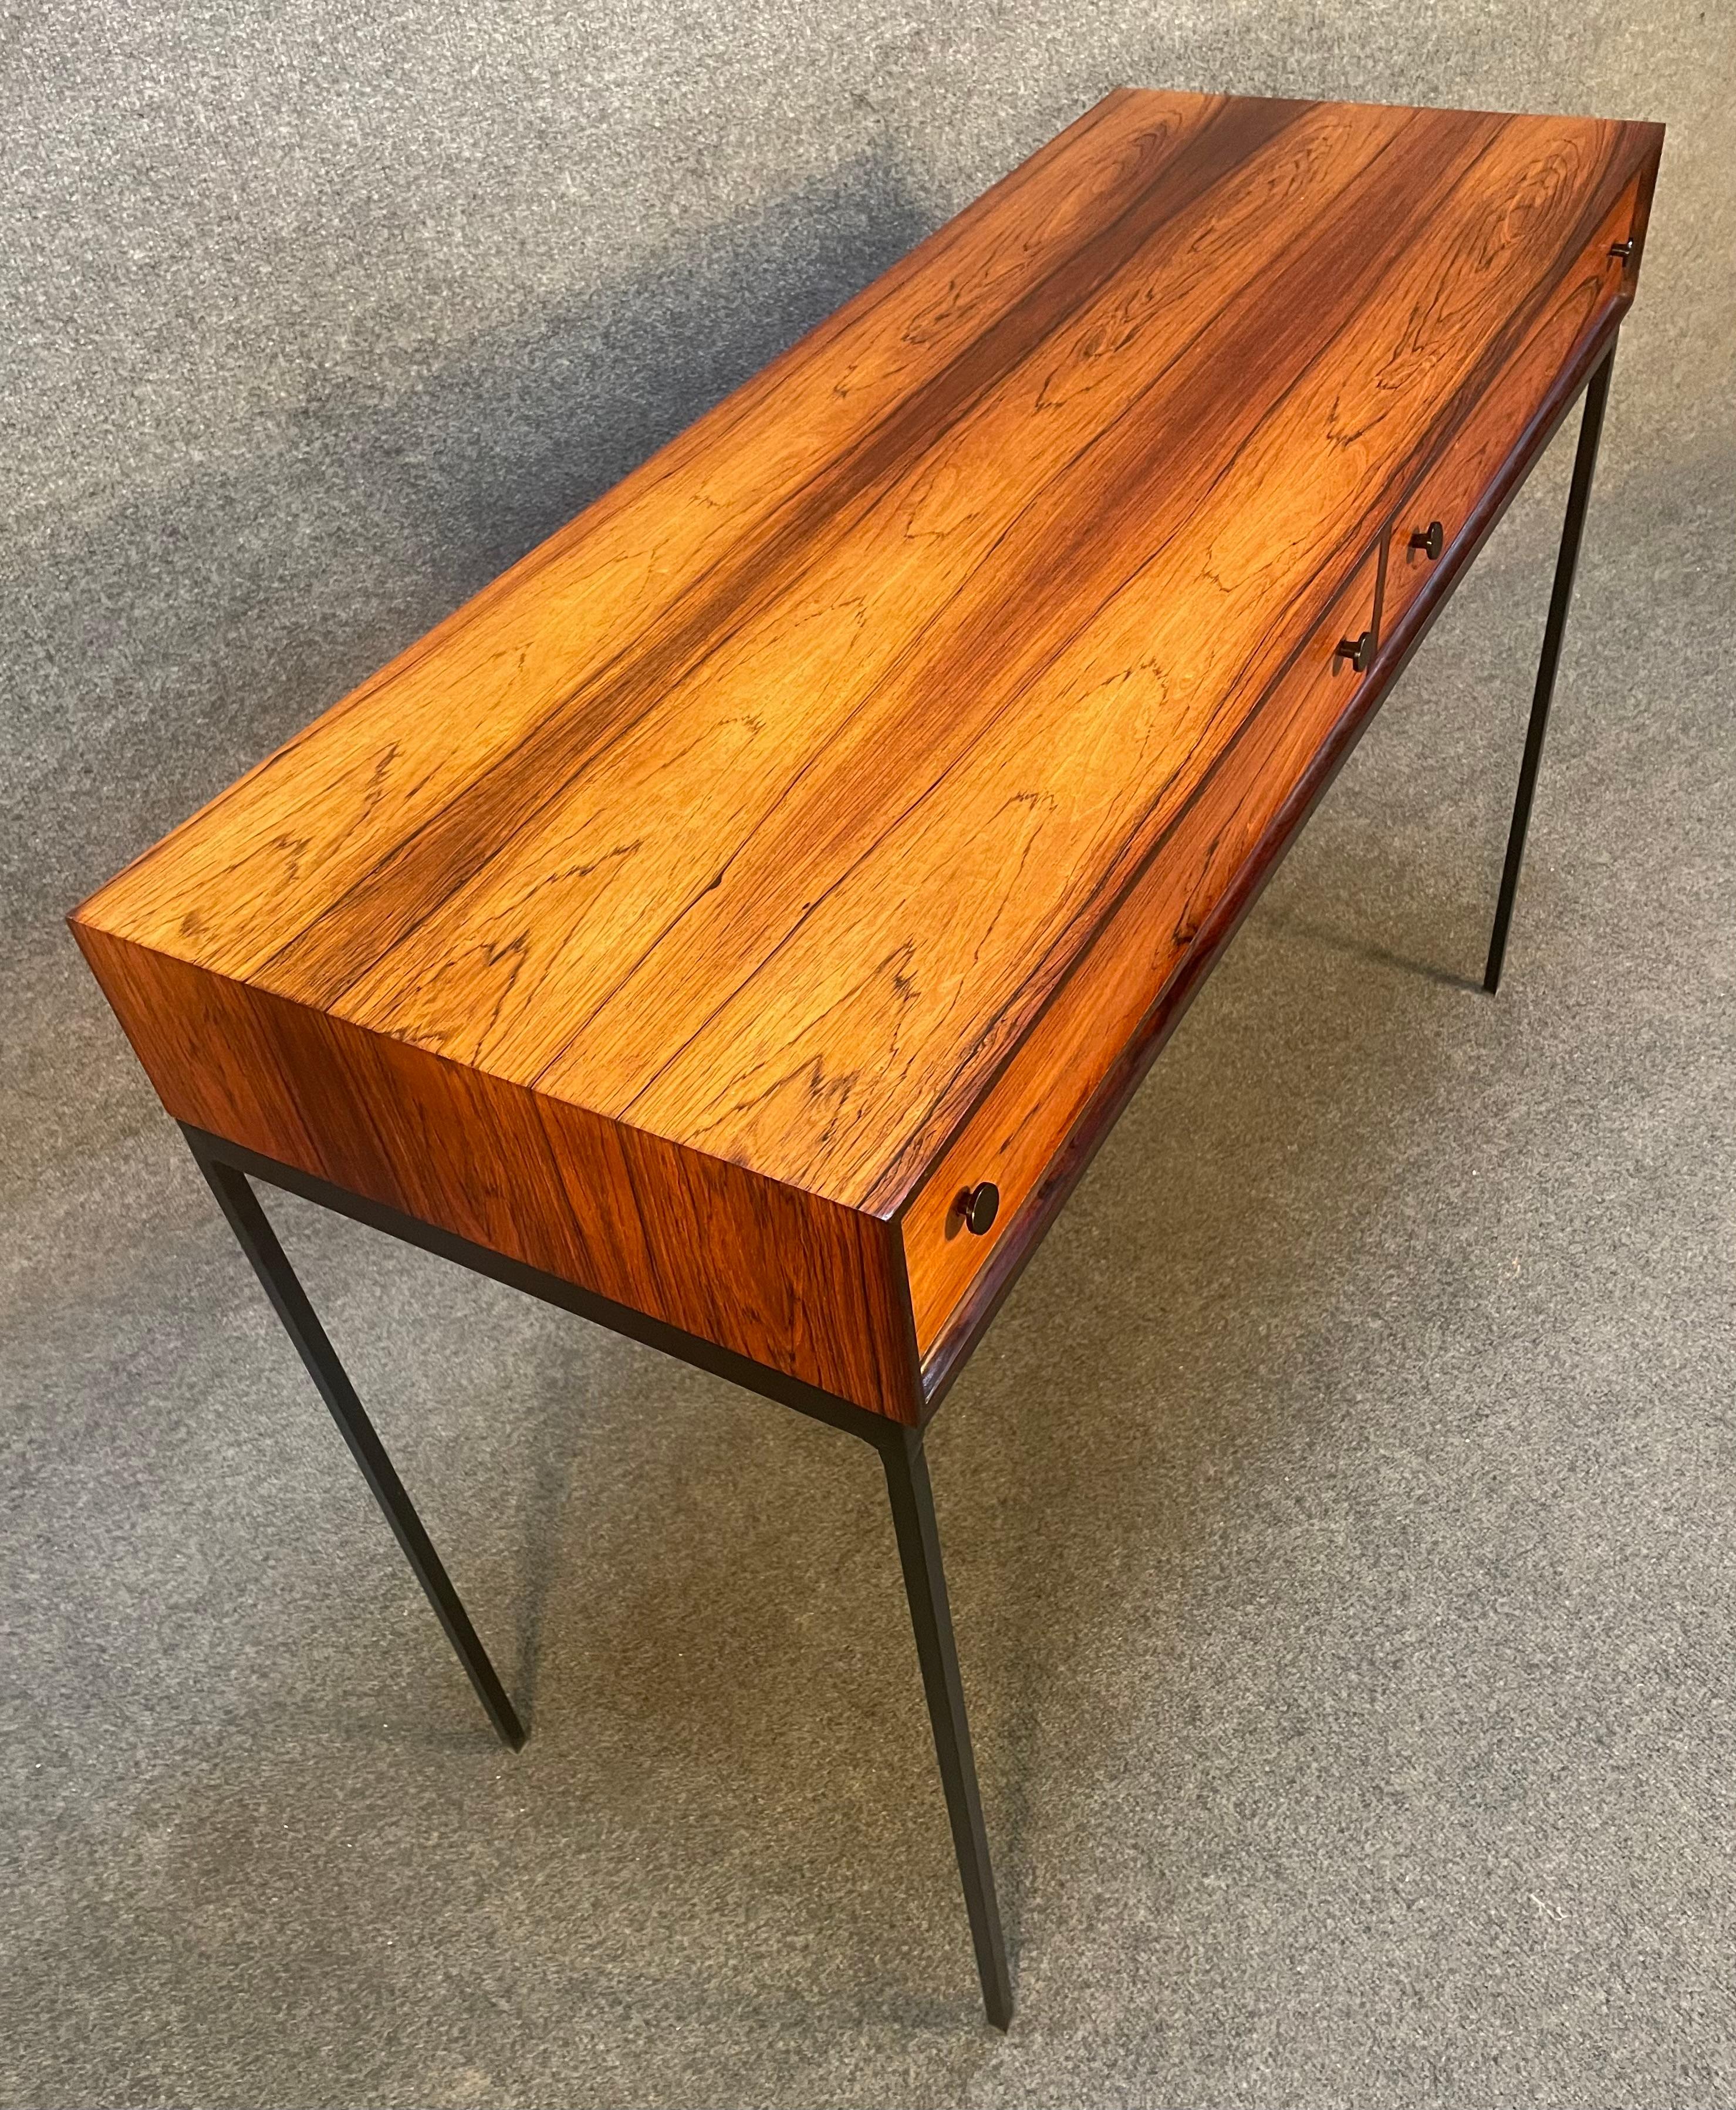 Woodwork Vintage Danish Mid-Century Modern Rosewood Entry Way Console by Poul Norreklit